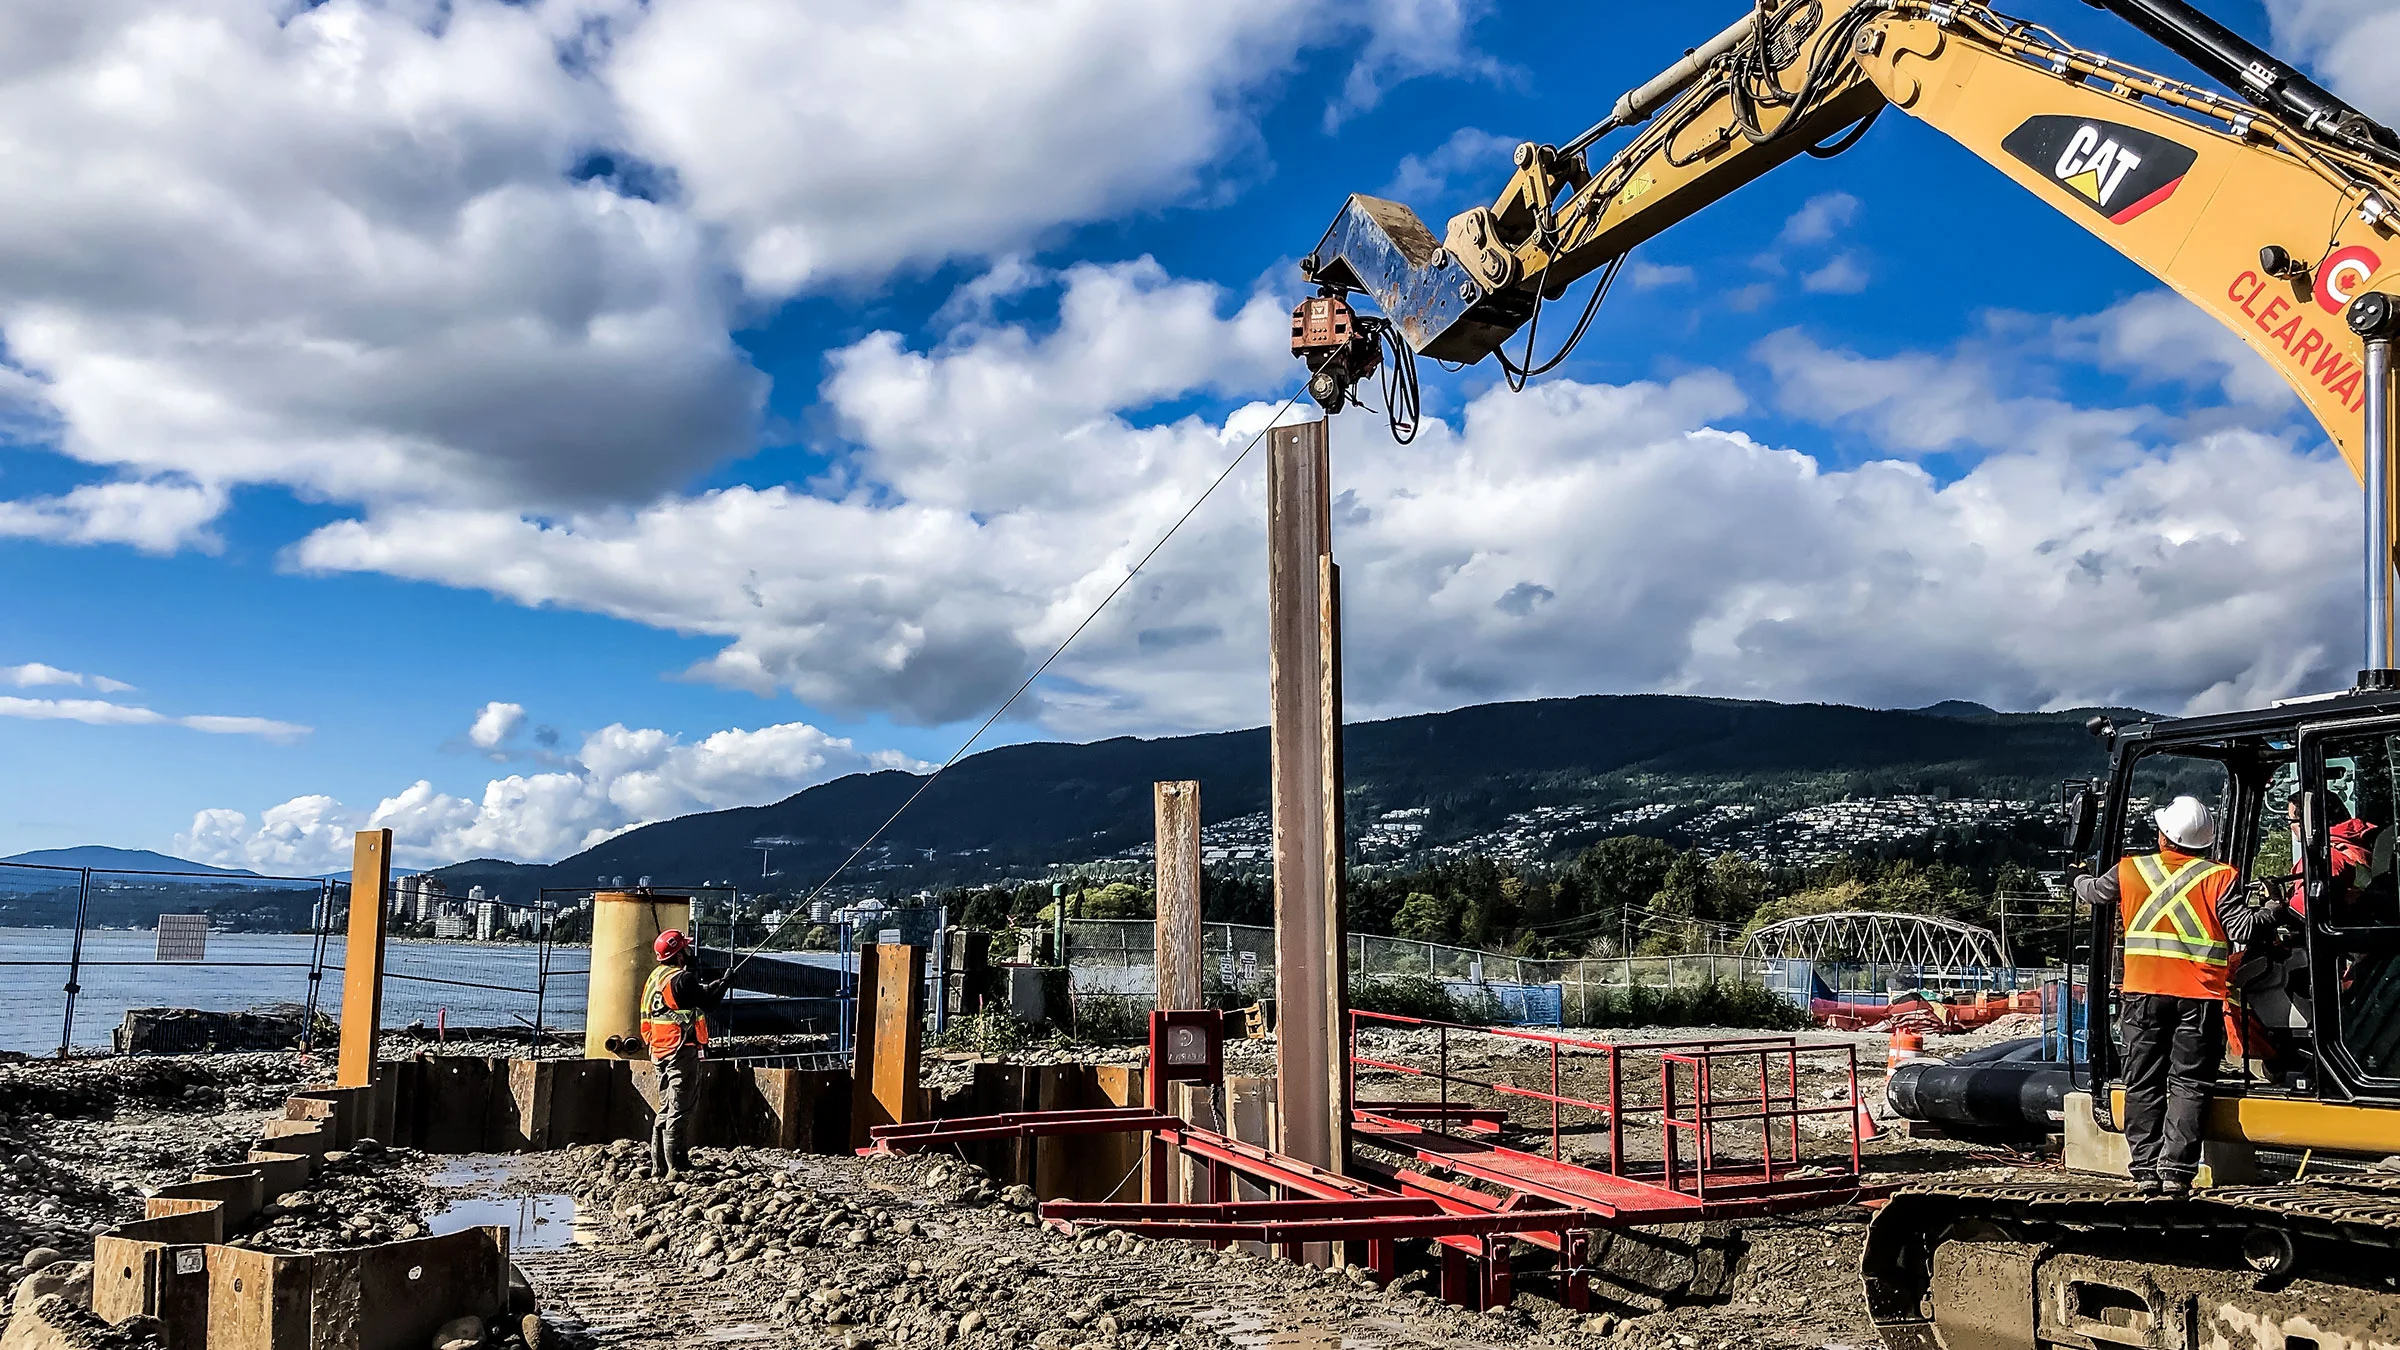 A Michels crew works on a foundations job near a river and mountains in Canada.